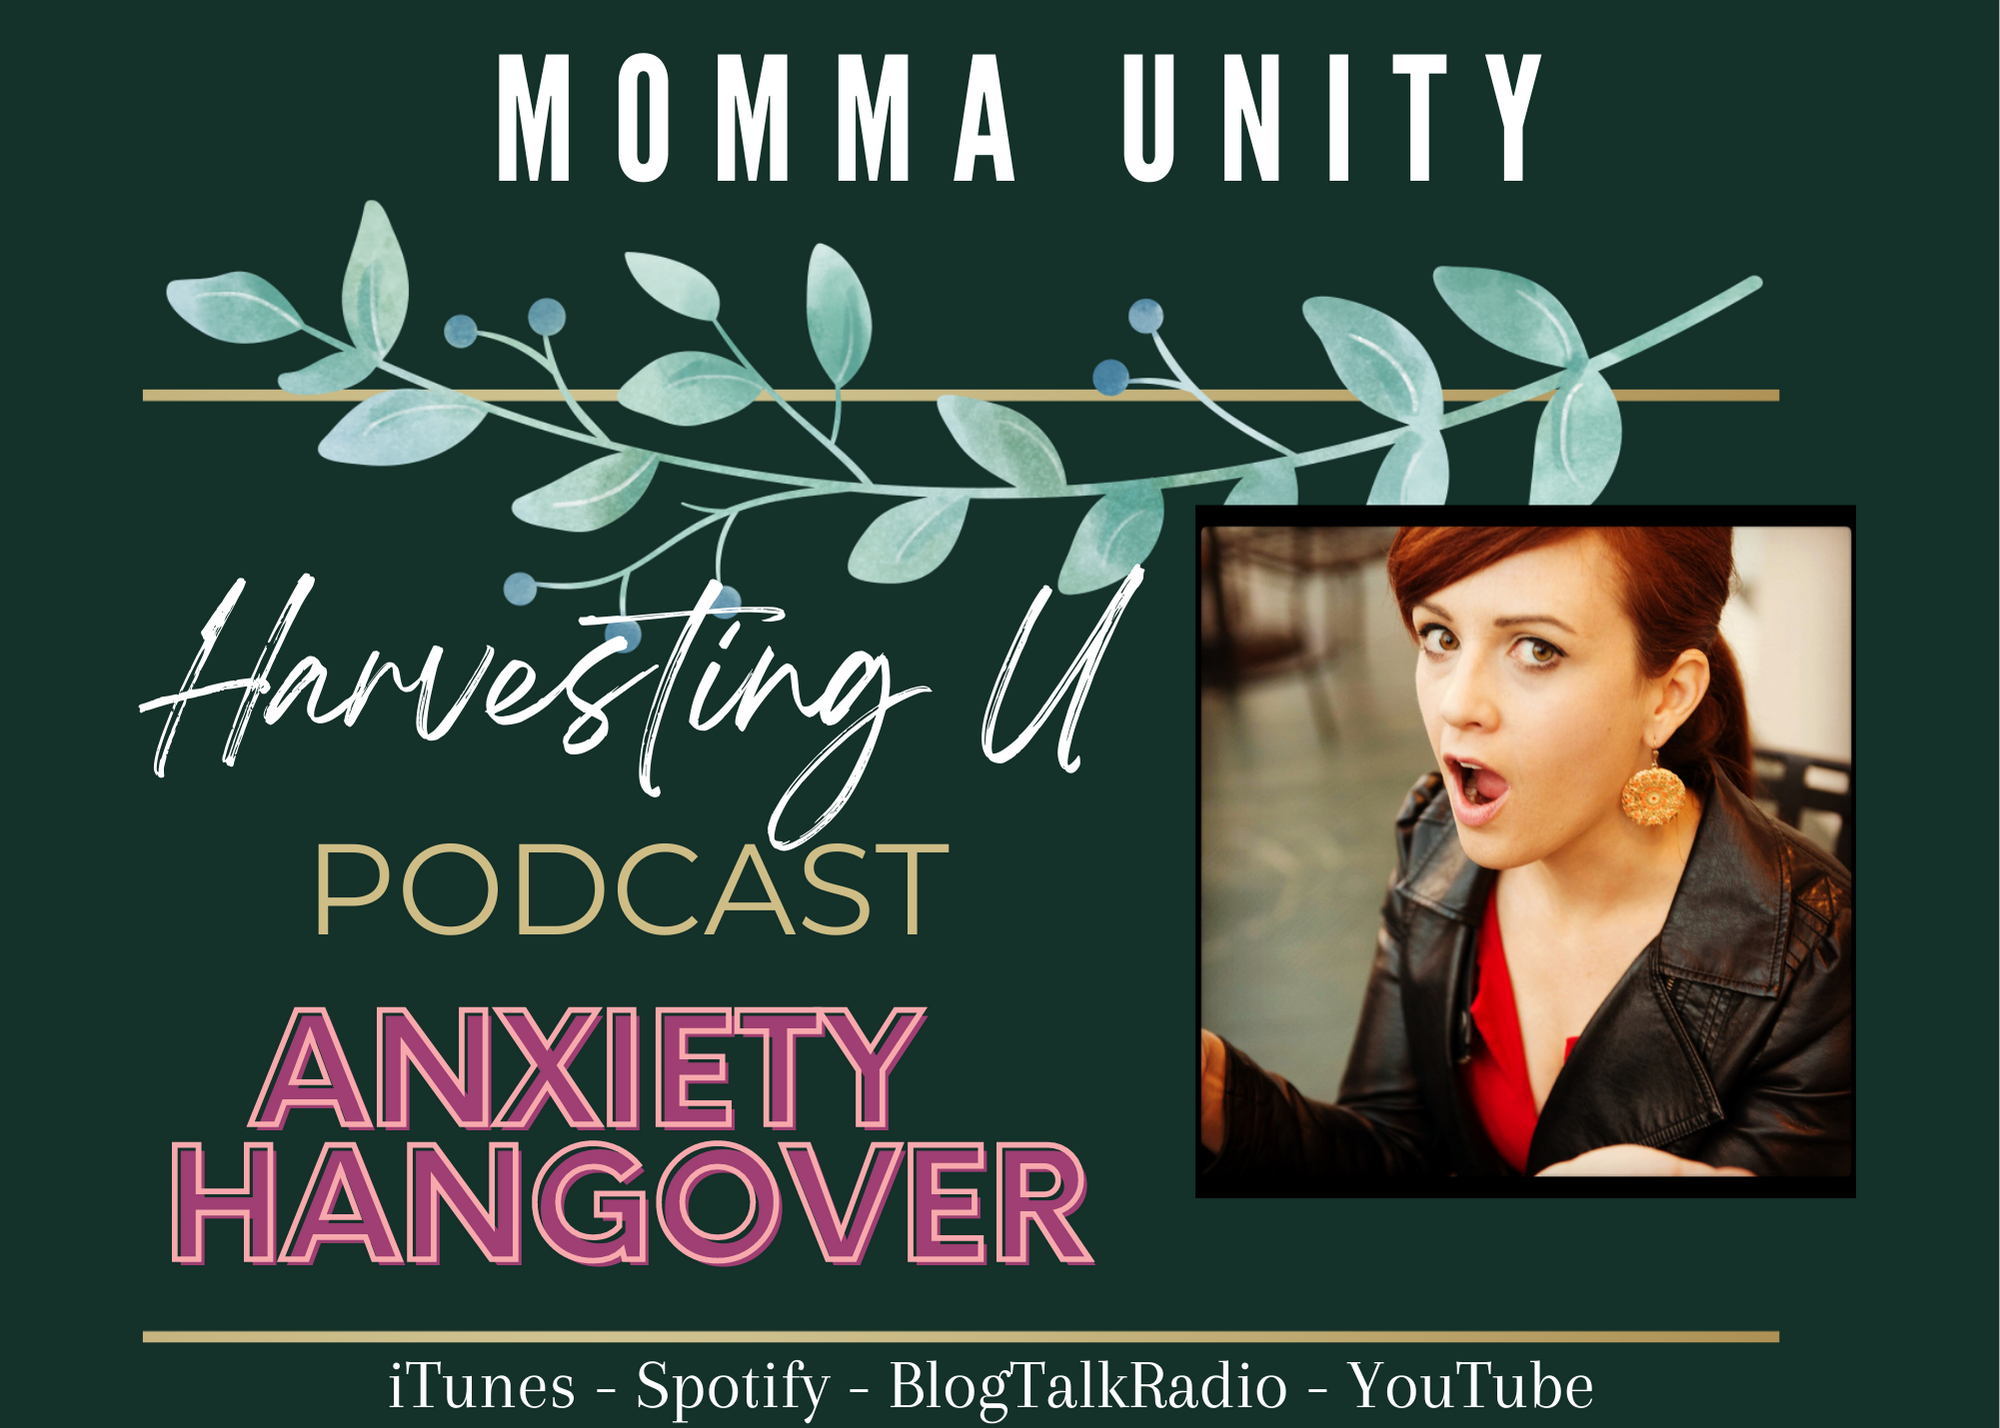 Harvesting U podcast: How to deal with anxiety hangovers